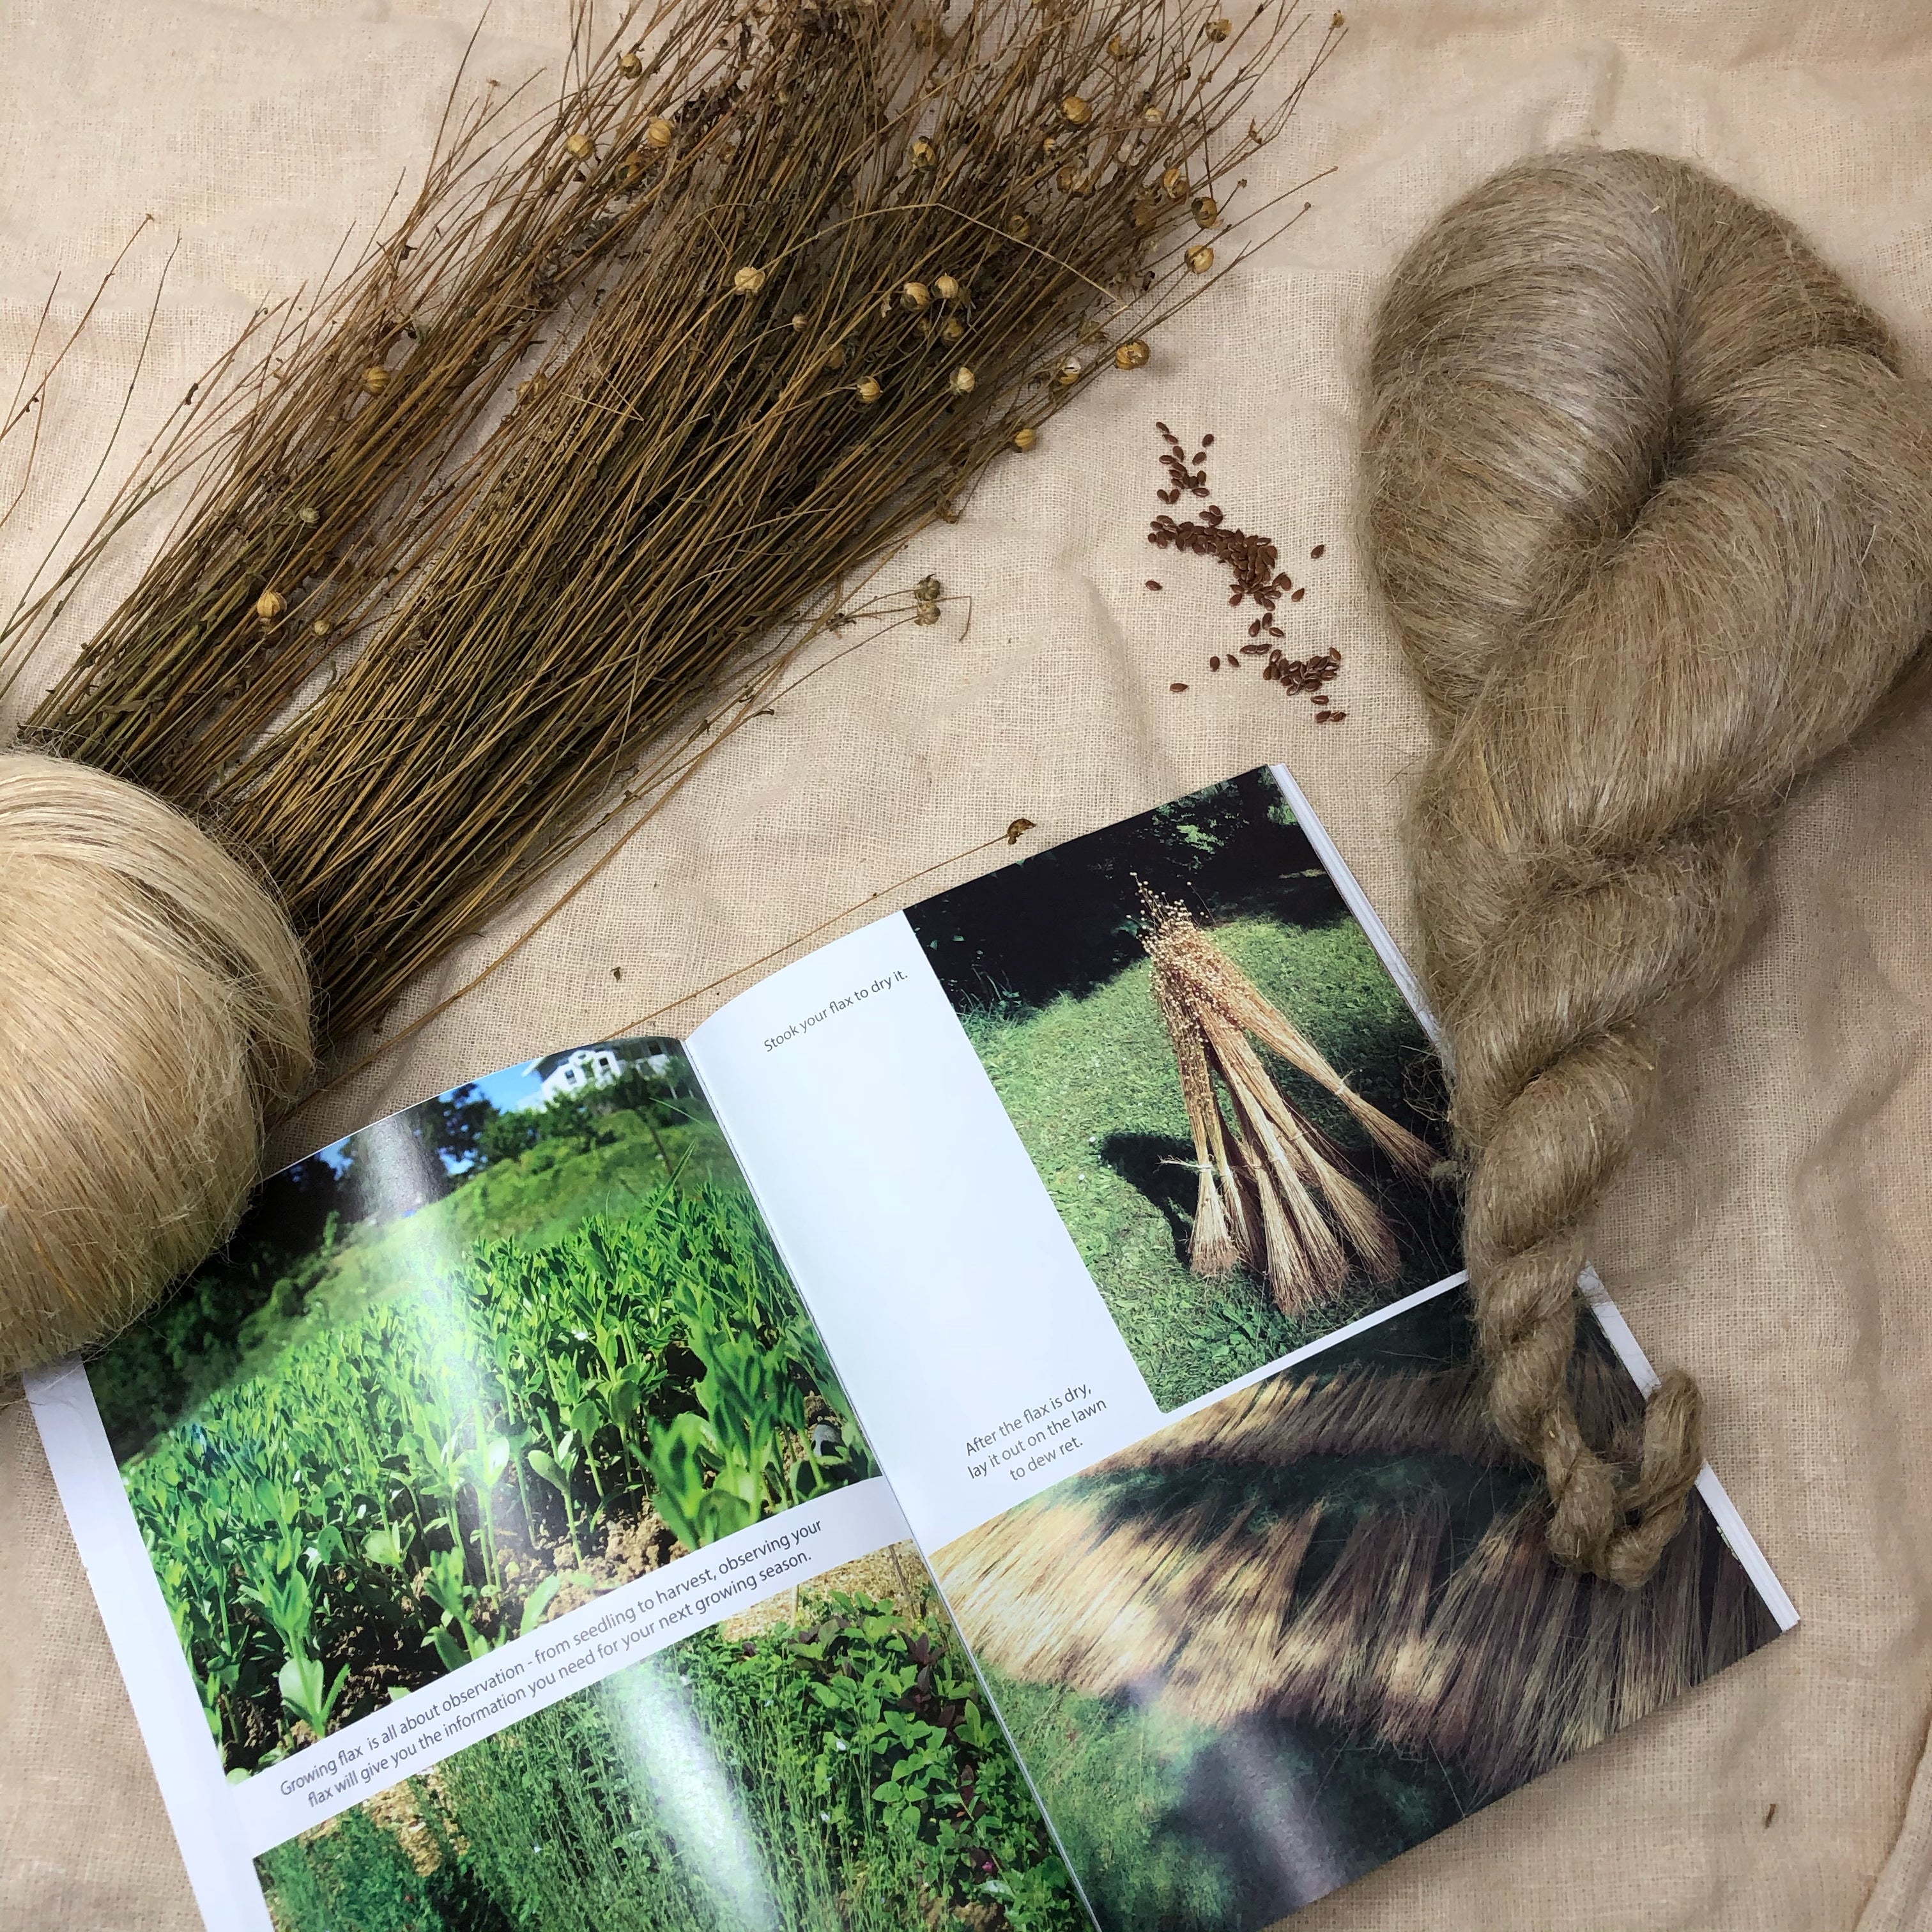 Homegrown Linen, Transforming flaxseed to fibre, by Raven Ranson